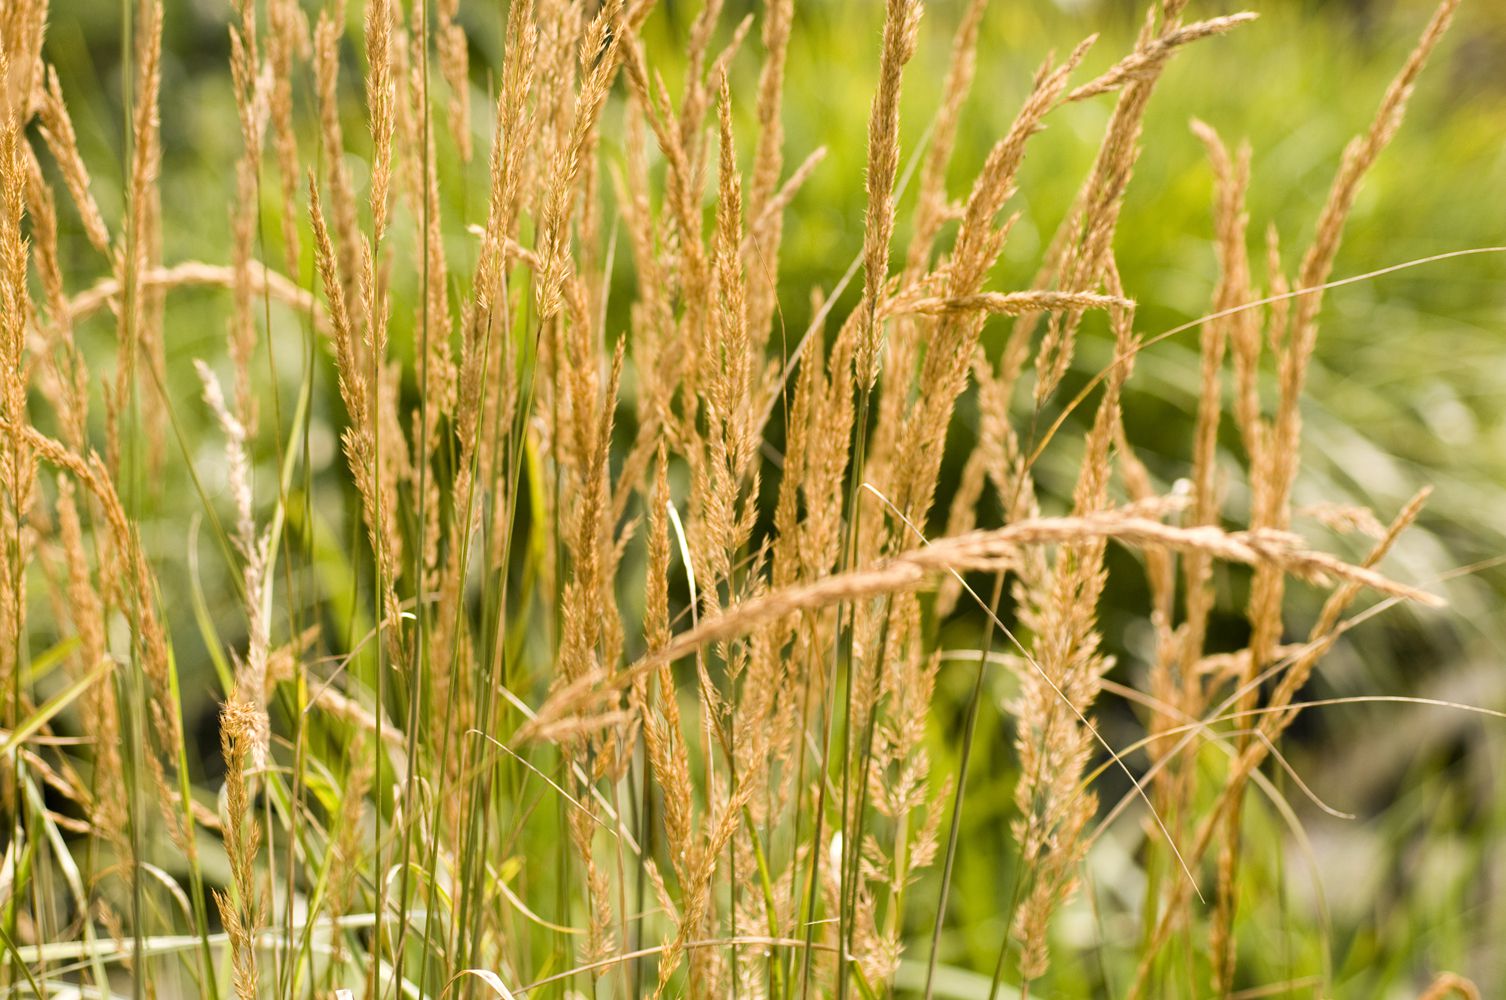 Feather-reed-grass-overdam-578371bc5f9b5